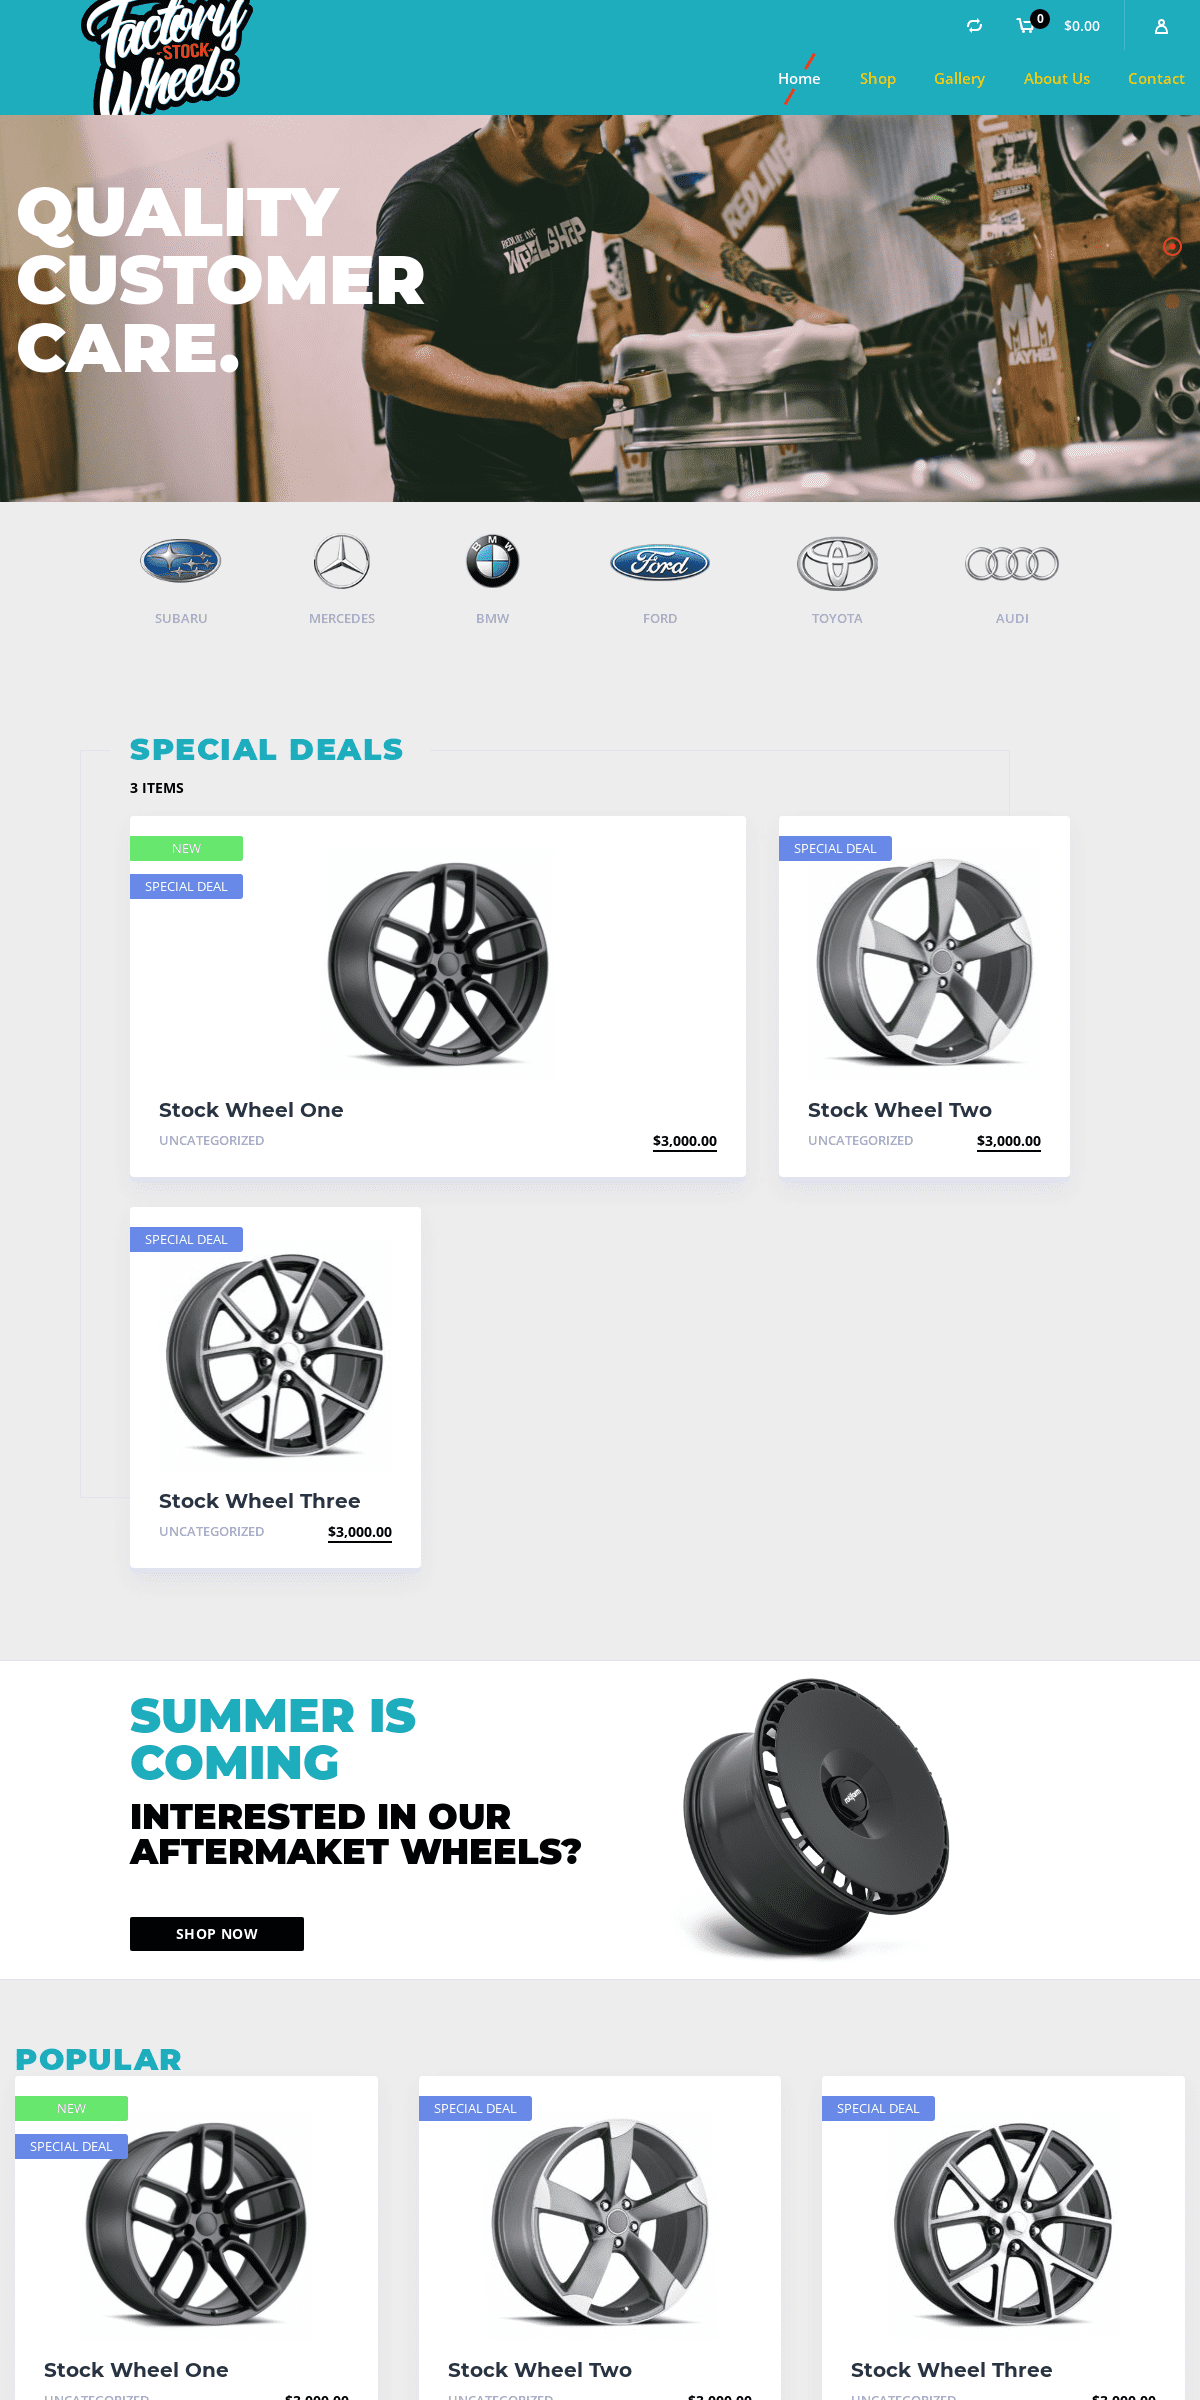 A complete backup of factorystockwheels.com